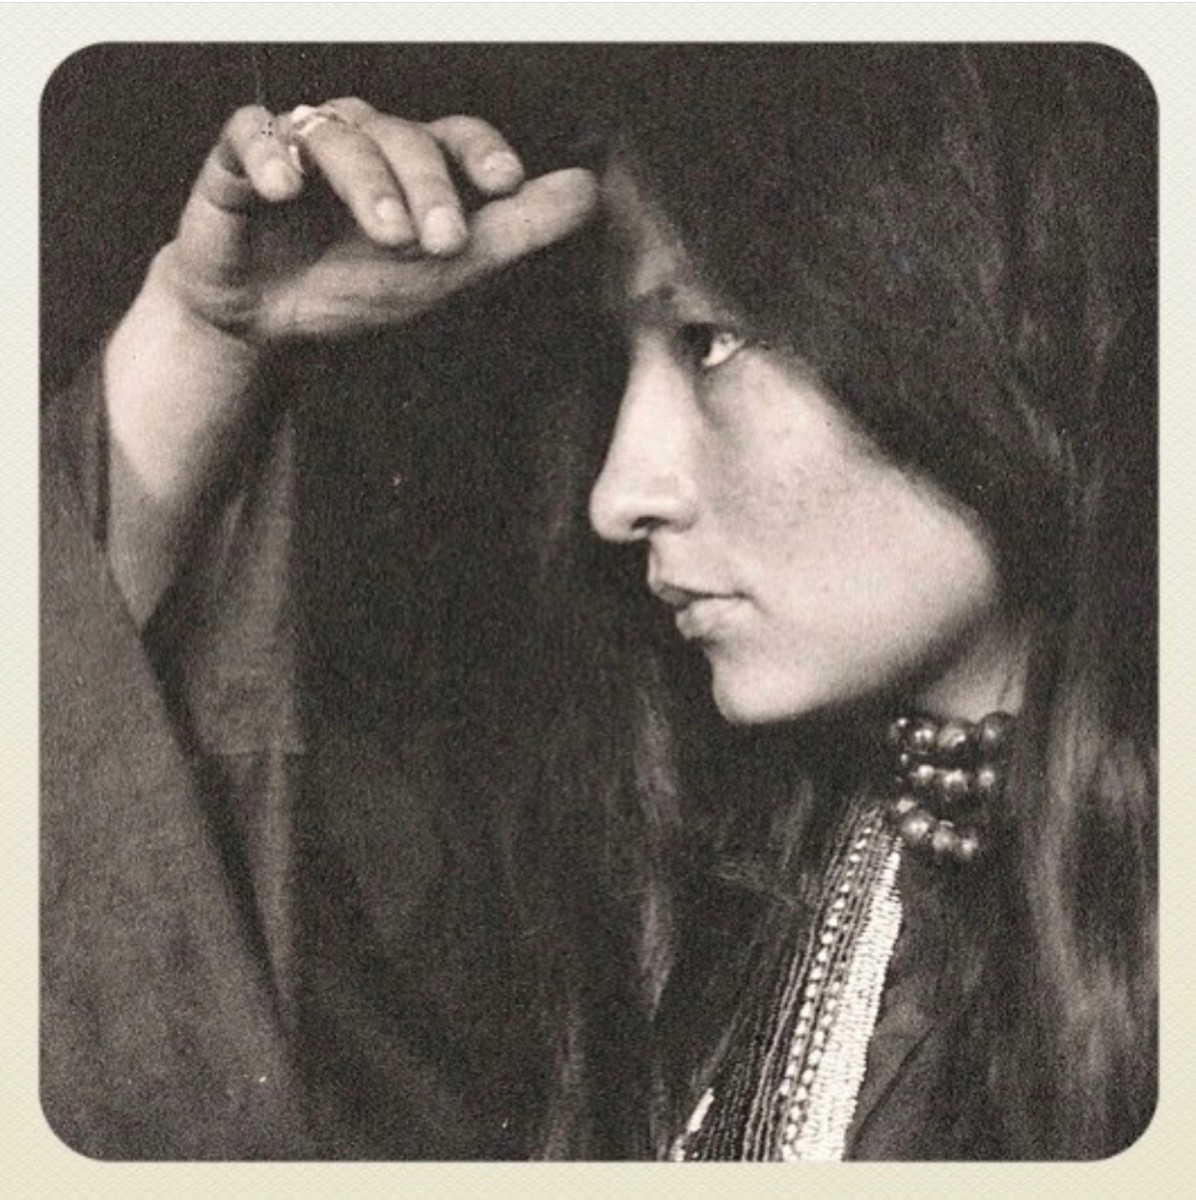 From the profile of Gertrude Simmons Bonnin's, or Zitkala-Sa - Red Bird, Indian rights activist on @theunsungheroines